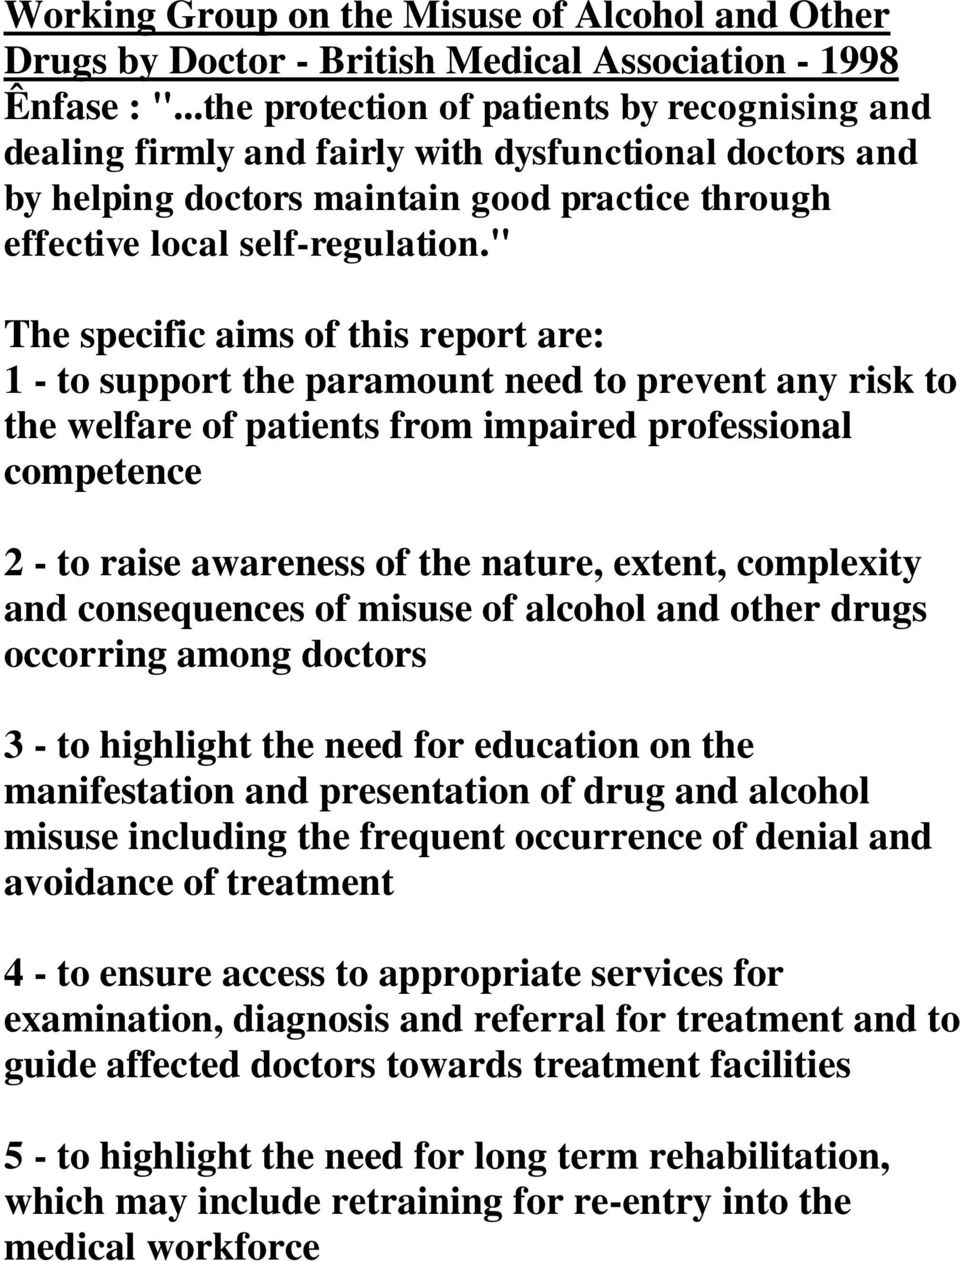 " The specific aims of this report are: 1 - to support the paramount need to prevent any risk to the welfare of patients from impaired professional competence 2 - to raise awareness of the nature,